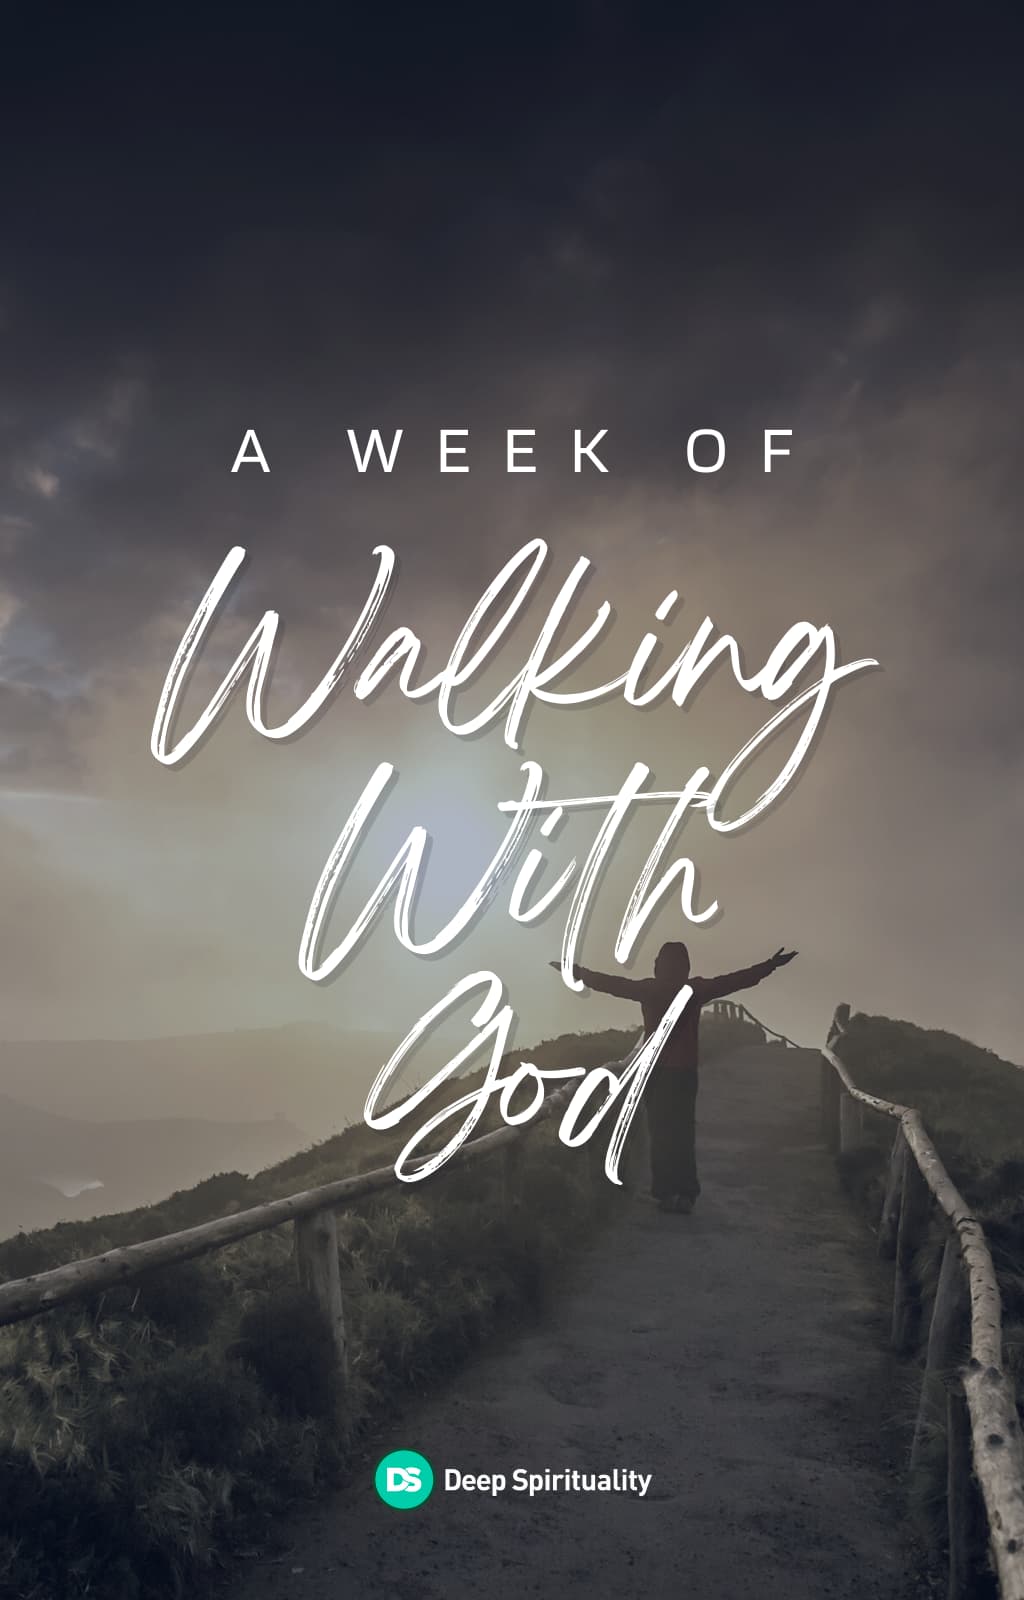 A Week of Walking with God 20